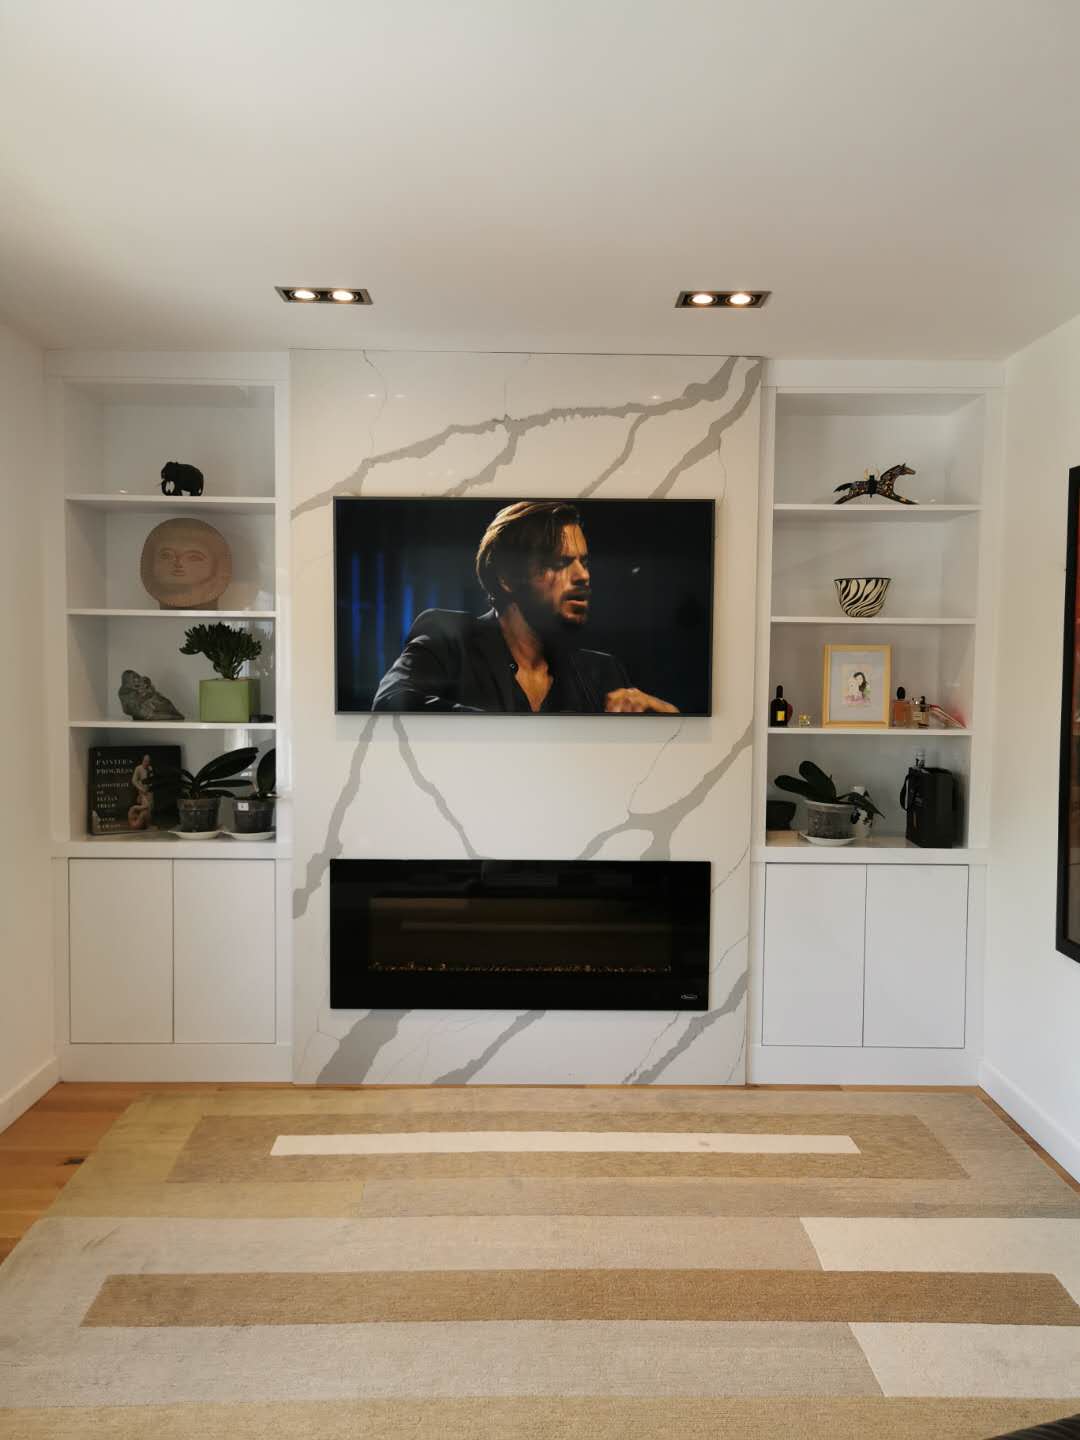 wall unit with TV and fireplace-modern style